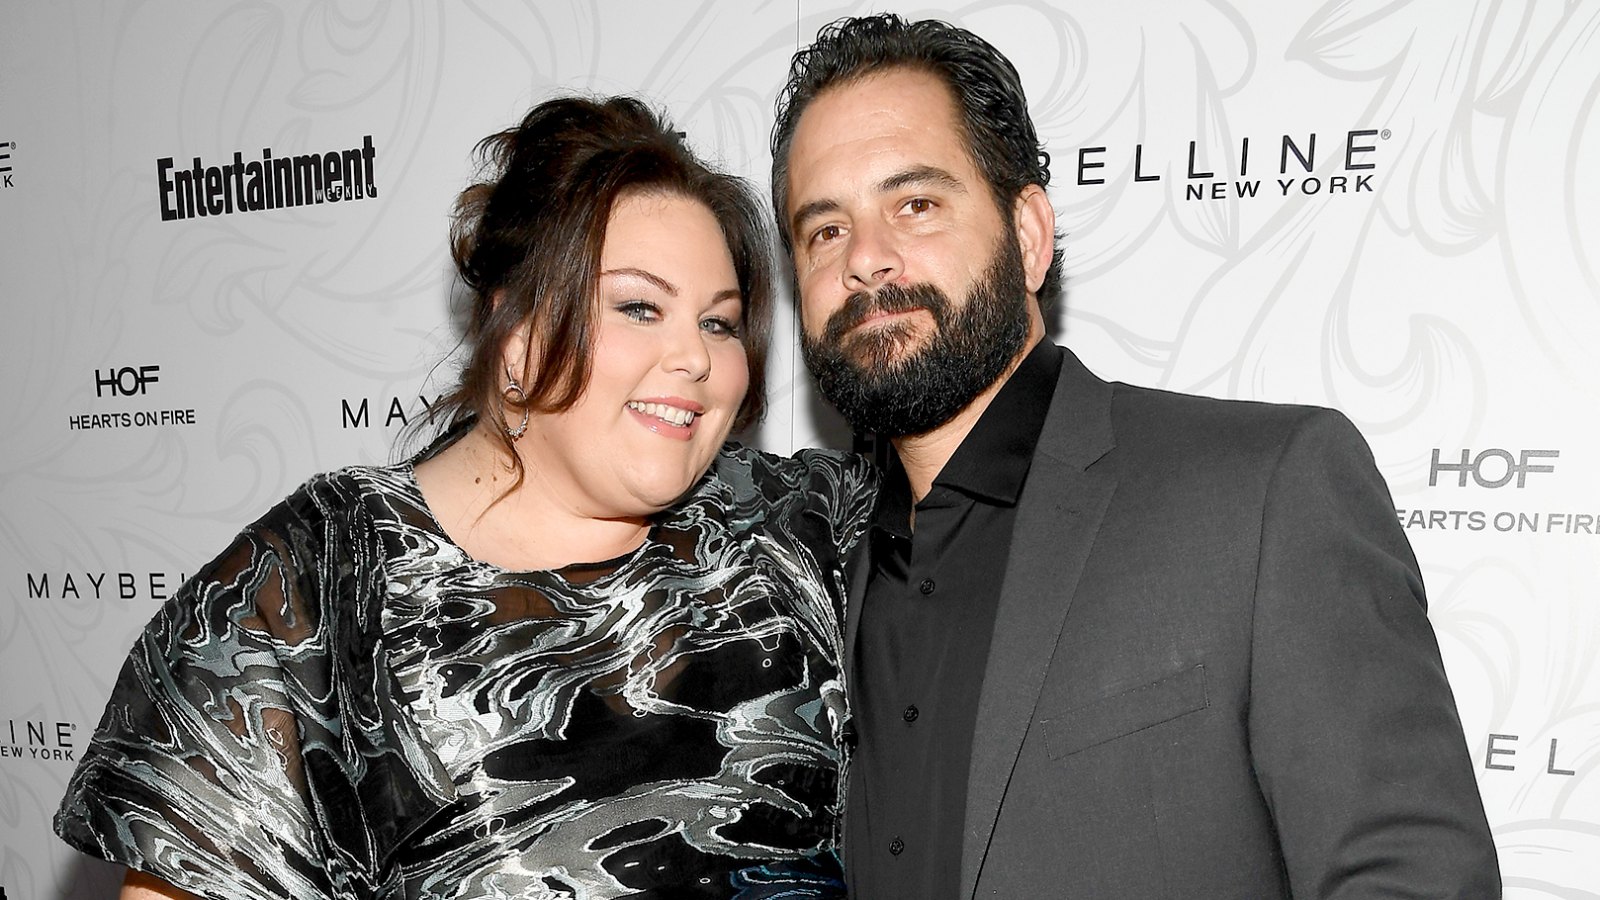 Chrissy Metz and Josh Stancil attends the Entertainment Weekly Celebration of SAG Award Nominees sponsored by Maybelline New York at Chateau Marmont on January 28, 2017 in Los Angeles, California.